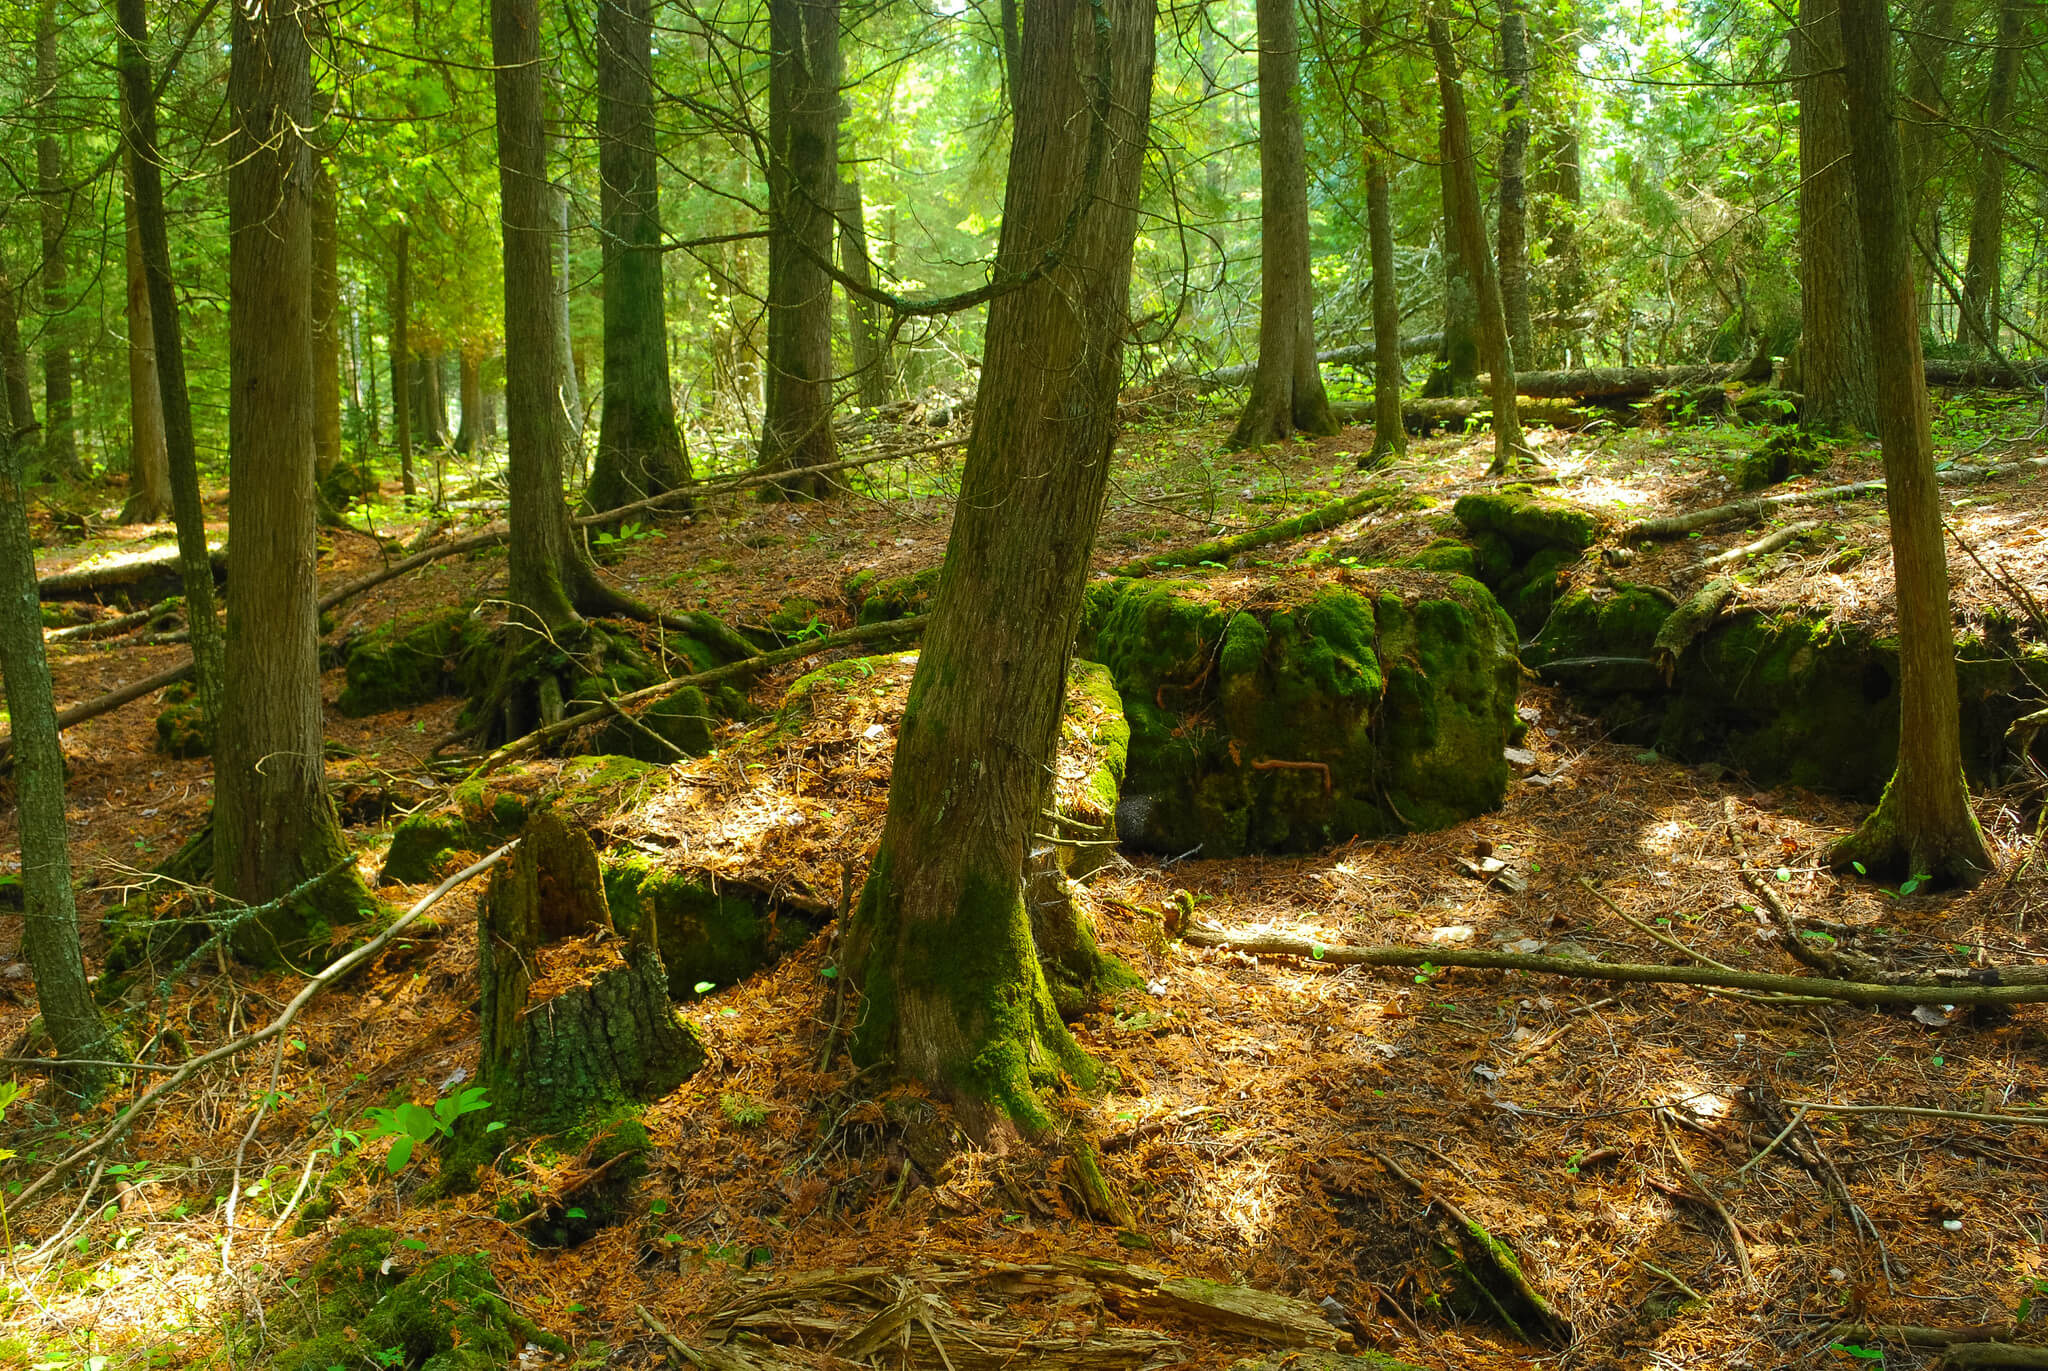 Sun shining through a forest lined with moss-covered rock.